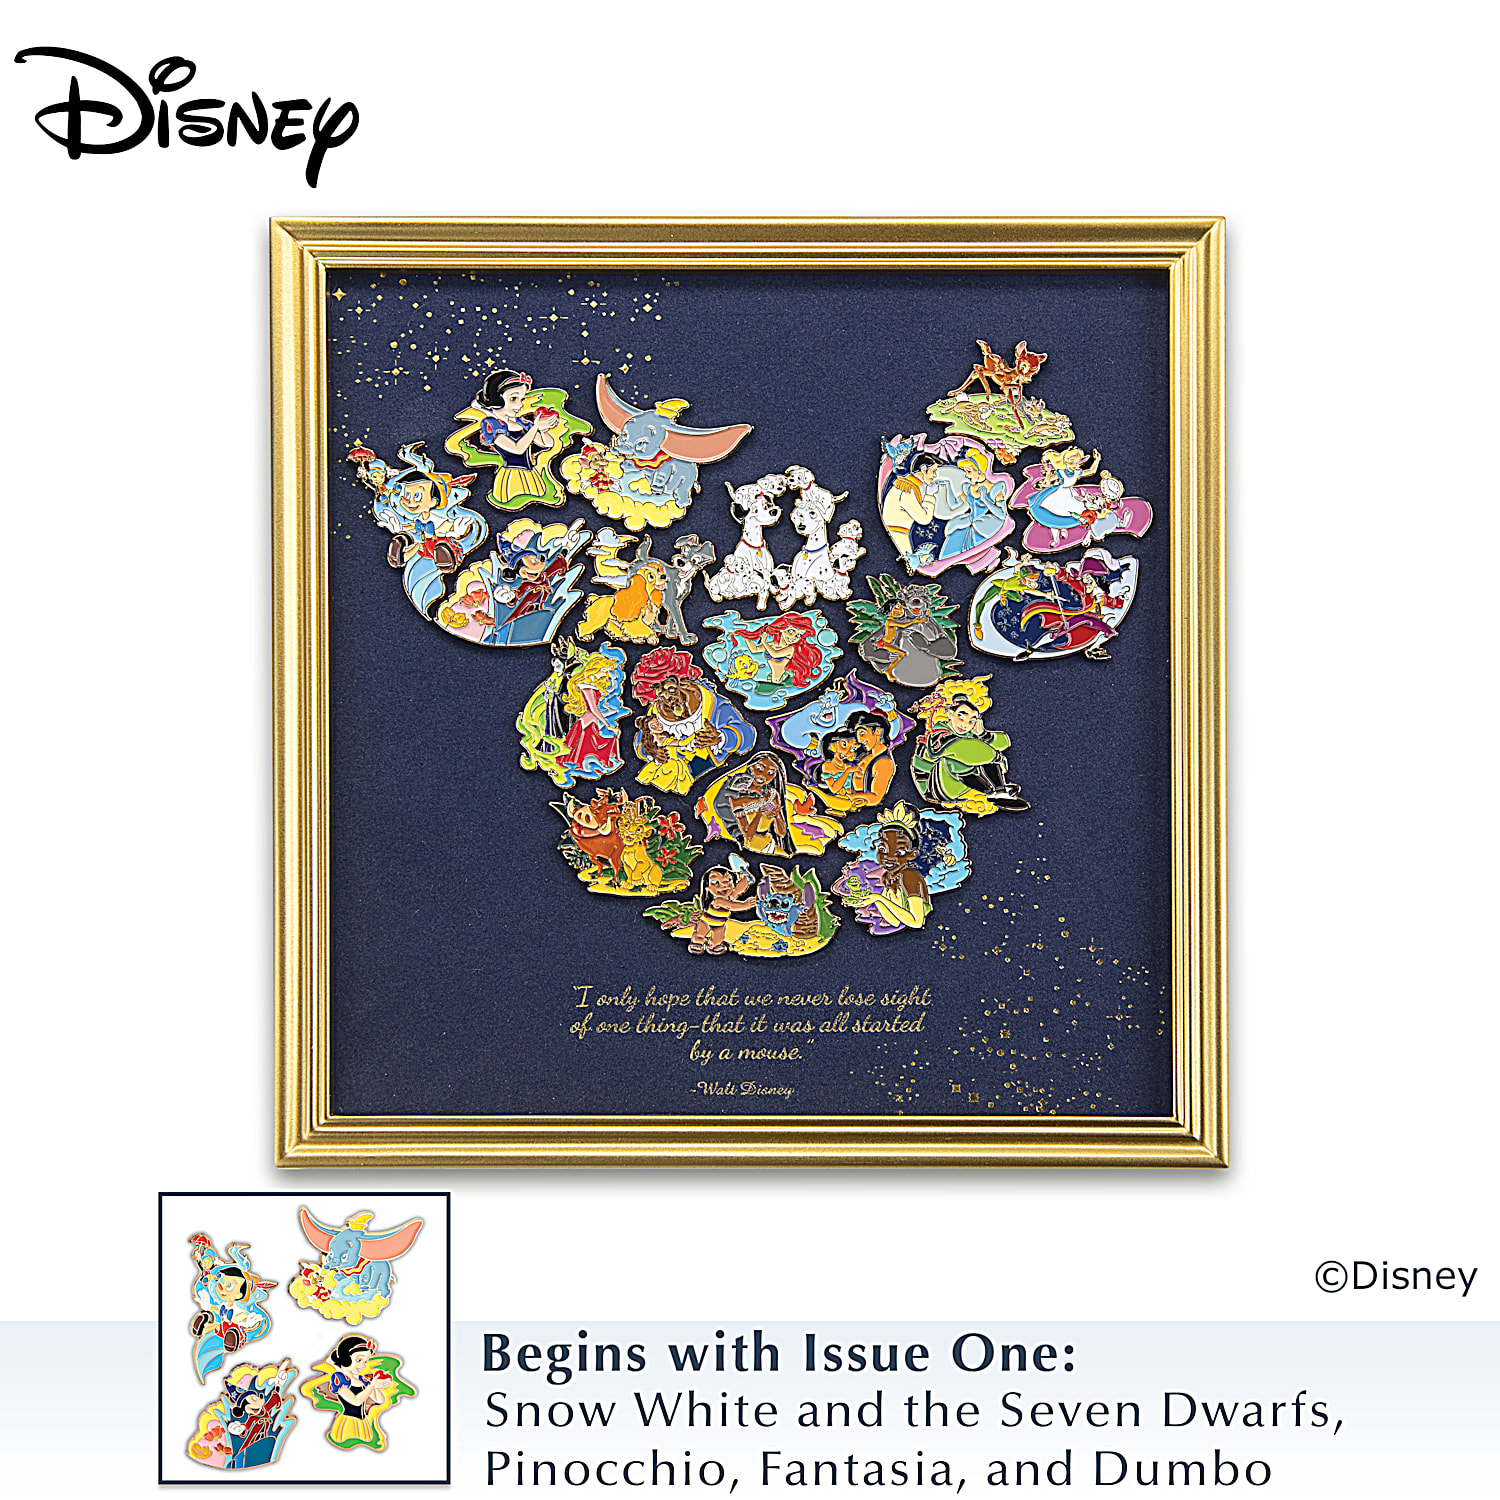 Ultimate Disney 24K Gold-Plated Hand-Enameled Puzzle Pin